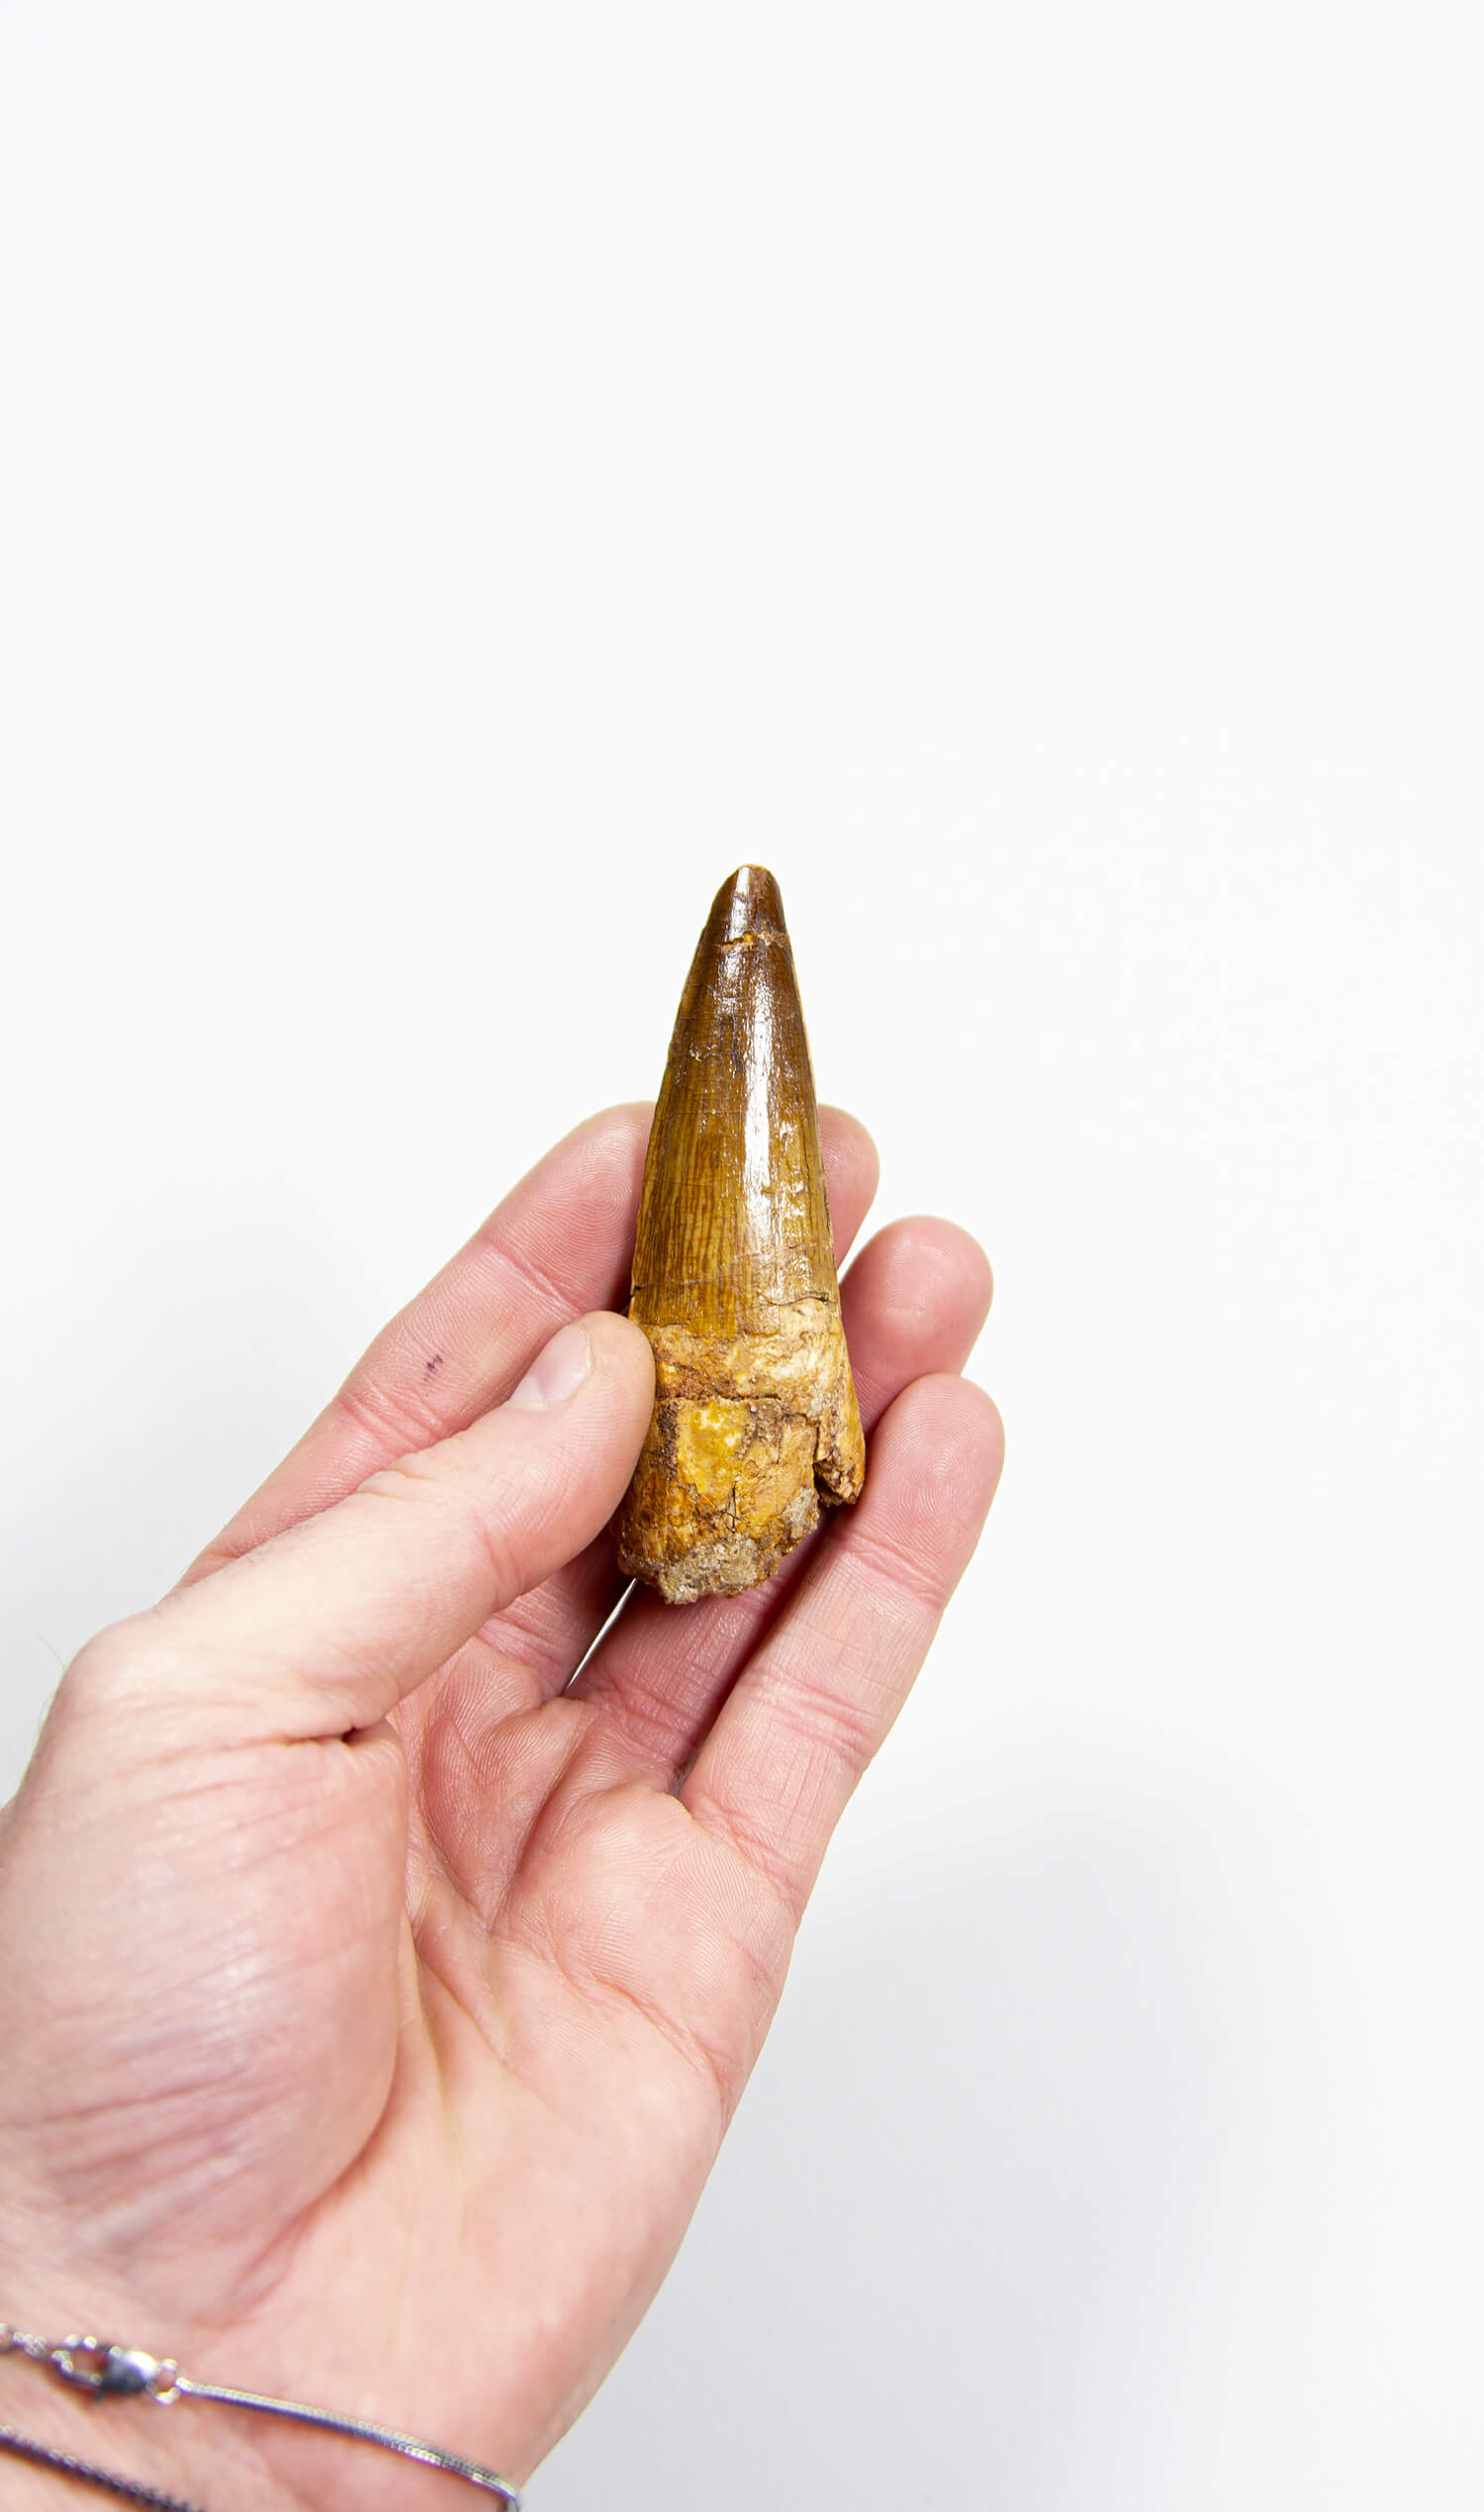 fossil dinosaur spinosaurus tooth for sale at the uk fossil store 87